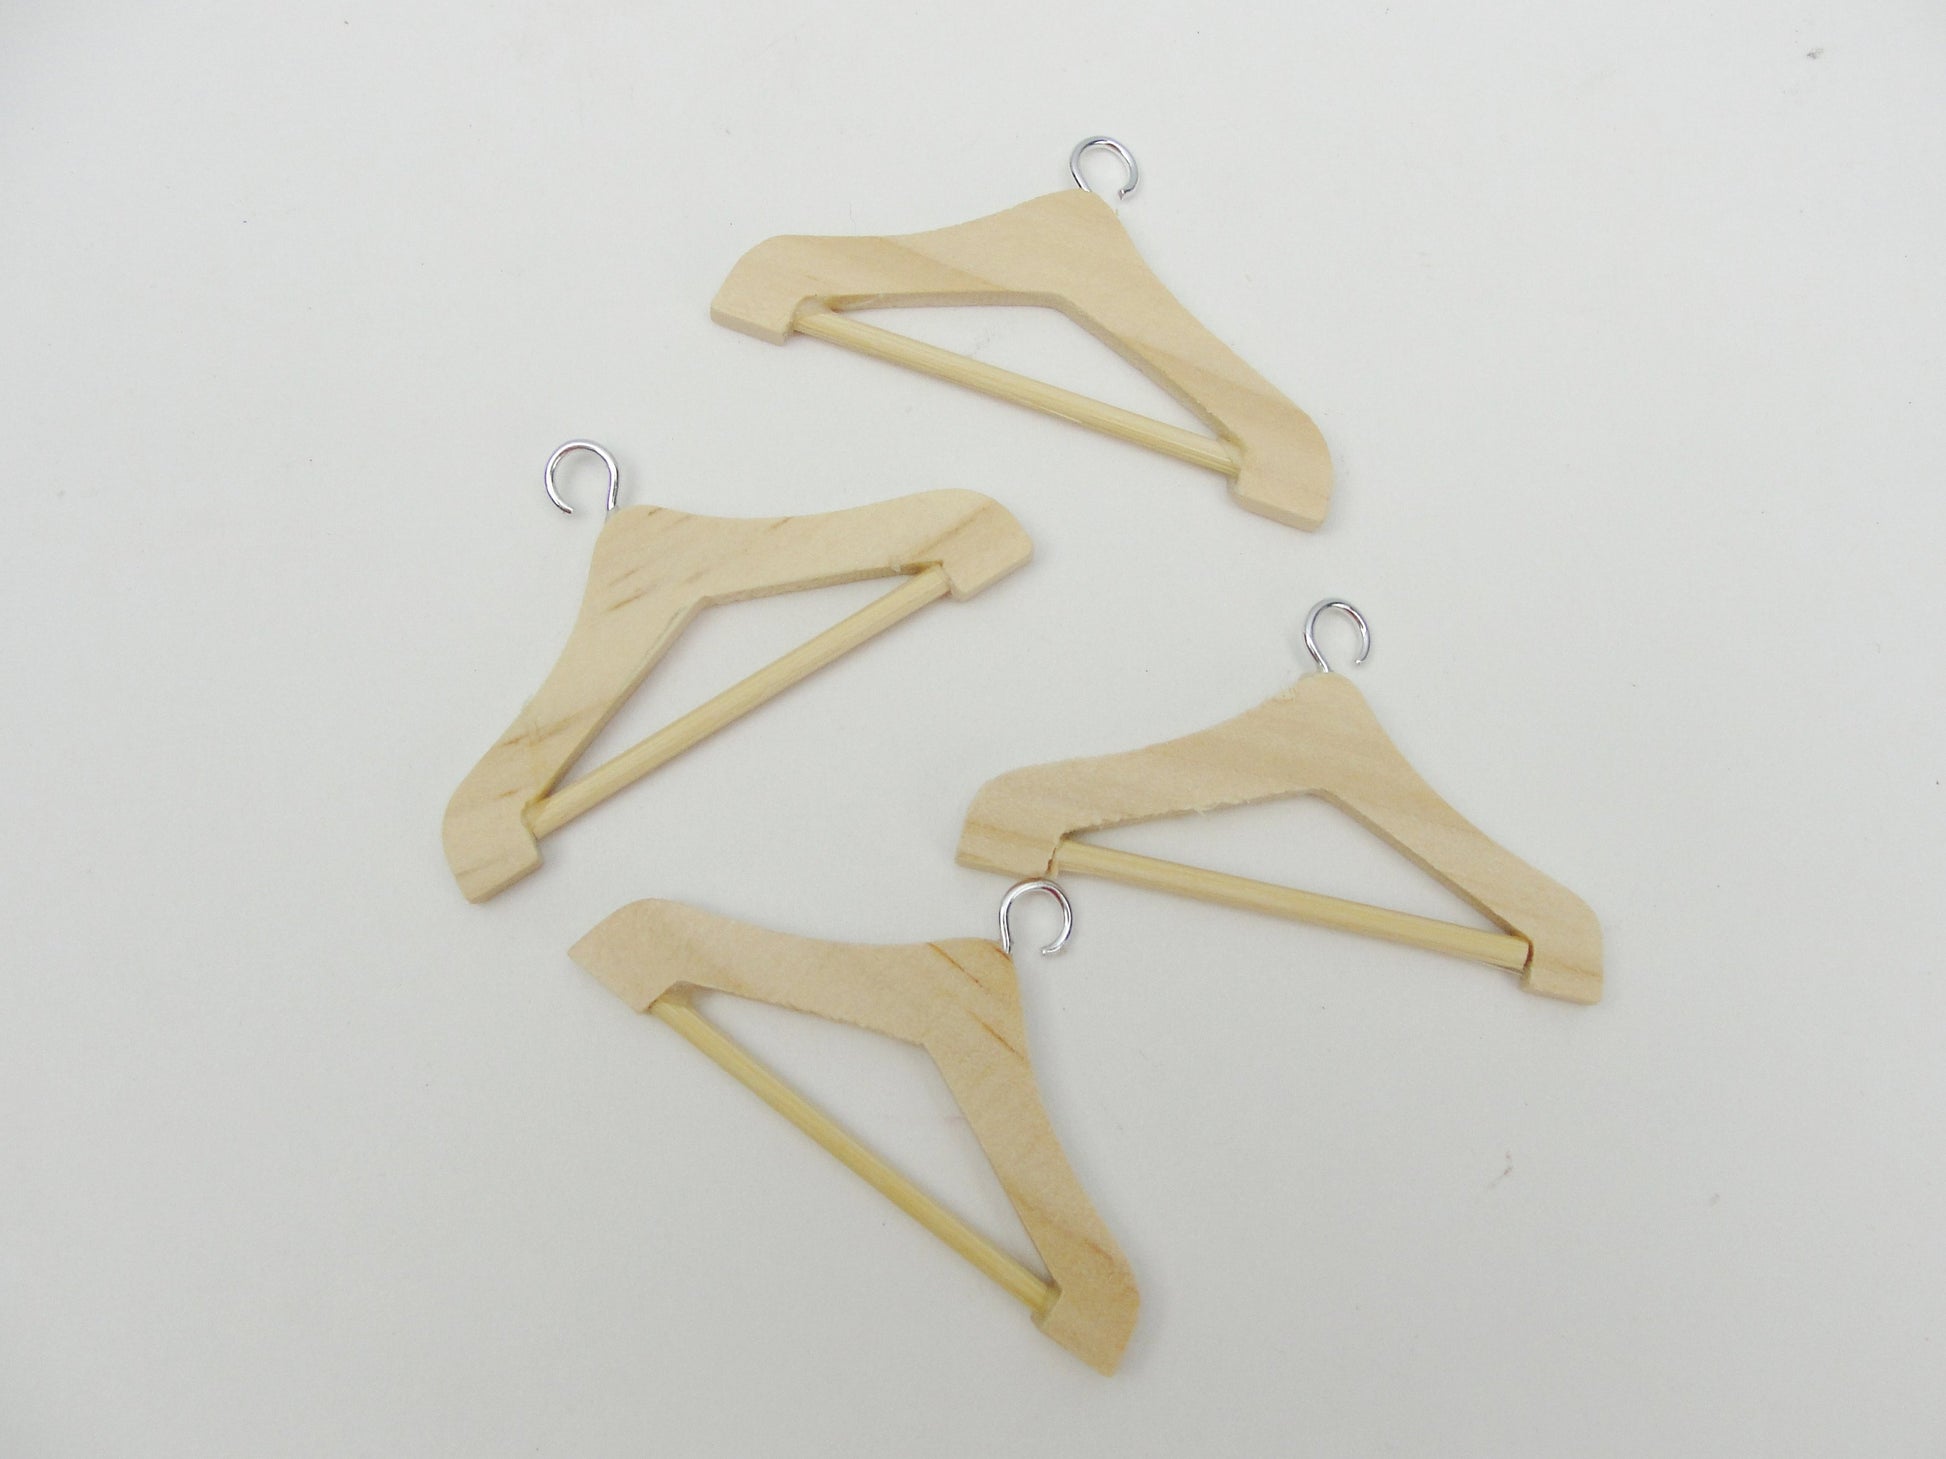 Dollhouse miniature wood clothes hangers - Miniatures - Craft Supply House